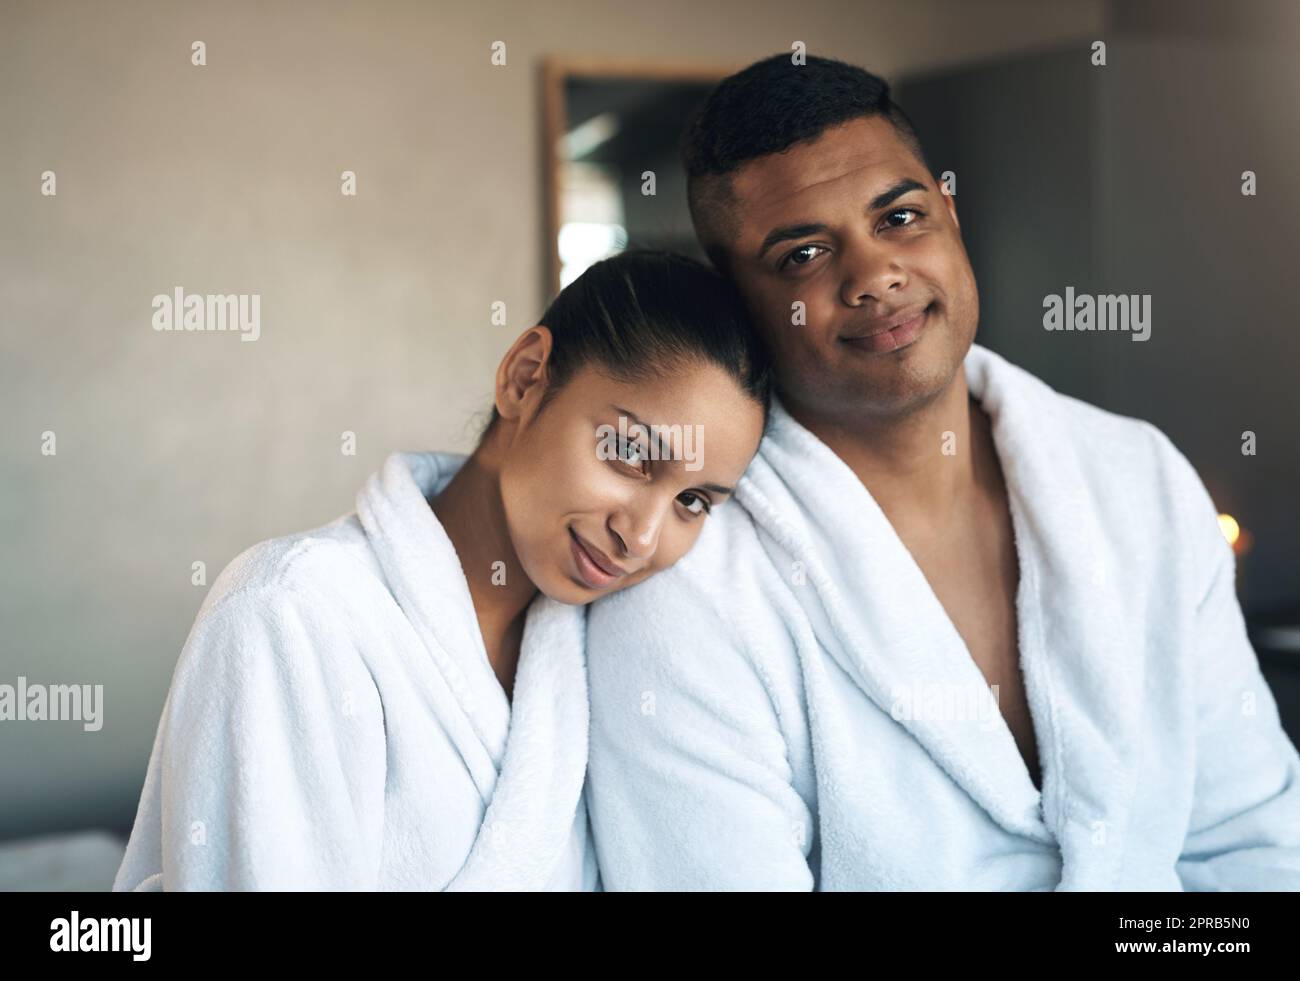 We came here to unwind and reconnect. Portrait of a young couple at a spa. Stock Photo